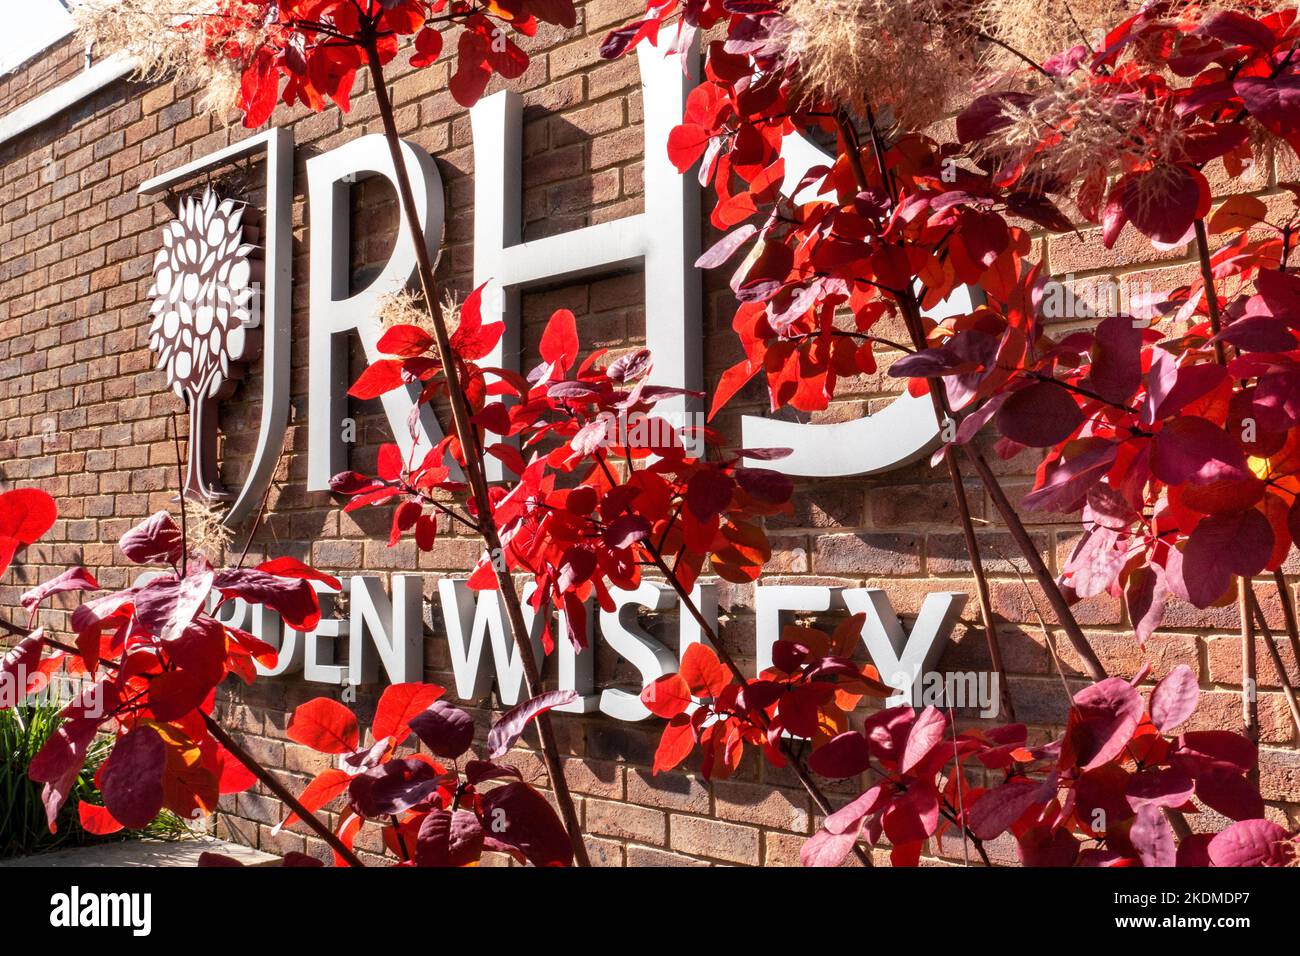 RHS Garden Sign and logo. Wisley Entrance viewed through autumnal red leaf foliage in sunny conditions Wisley Gardens Surrey UK Stock Photo